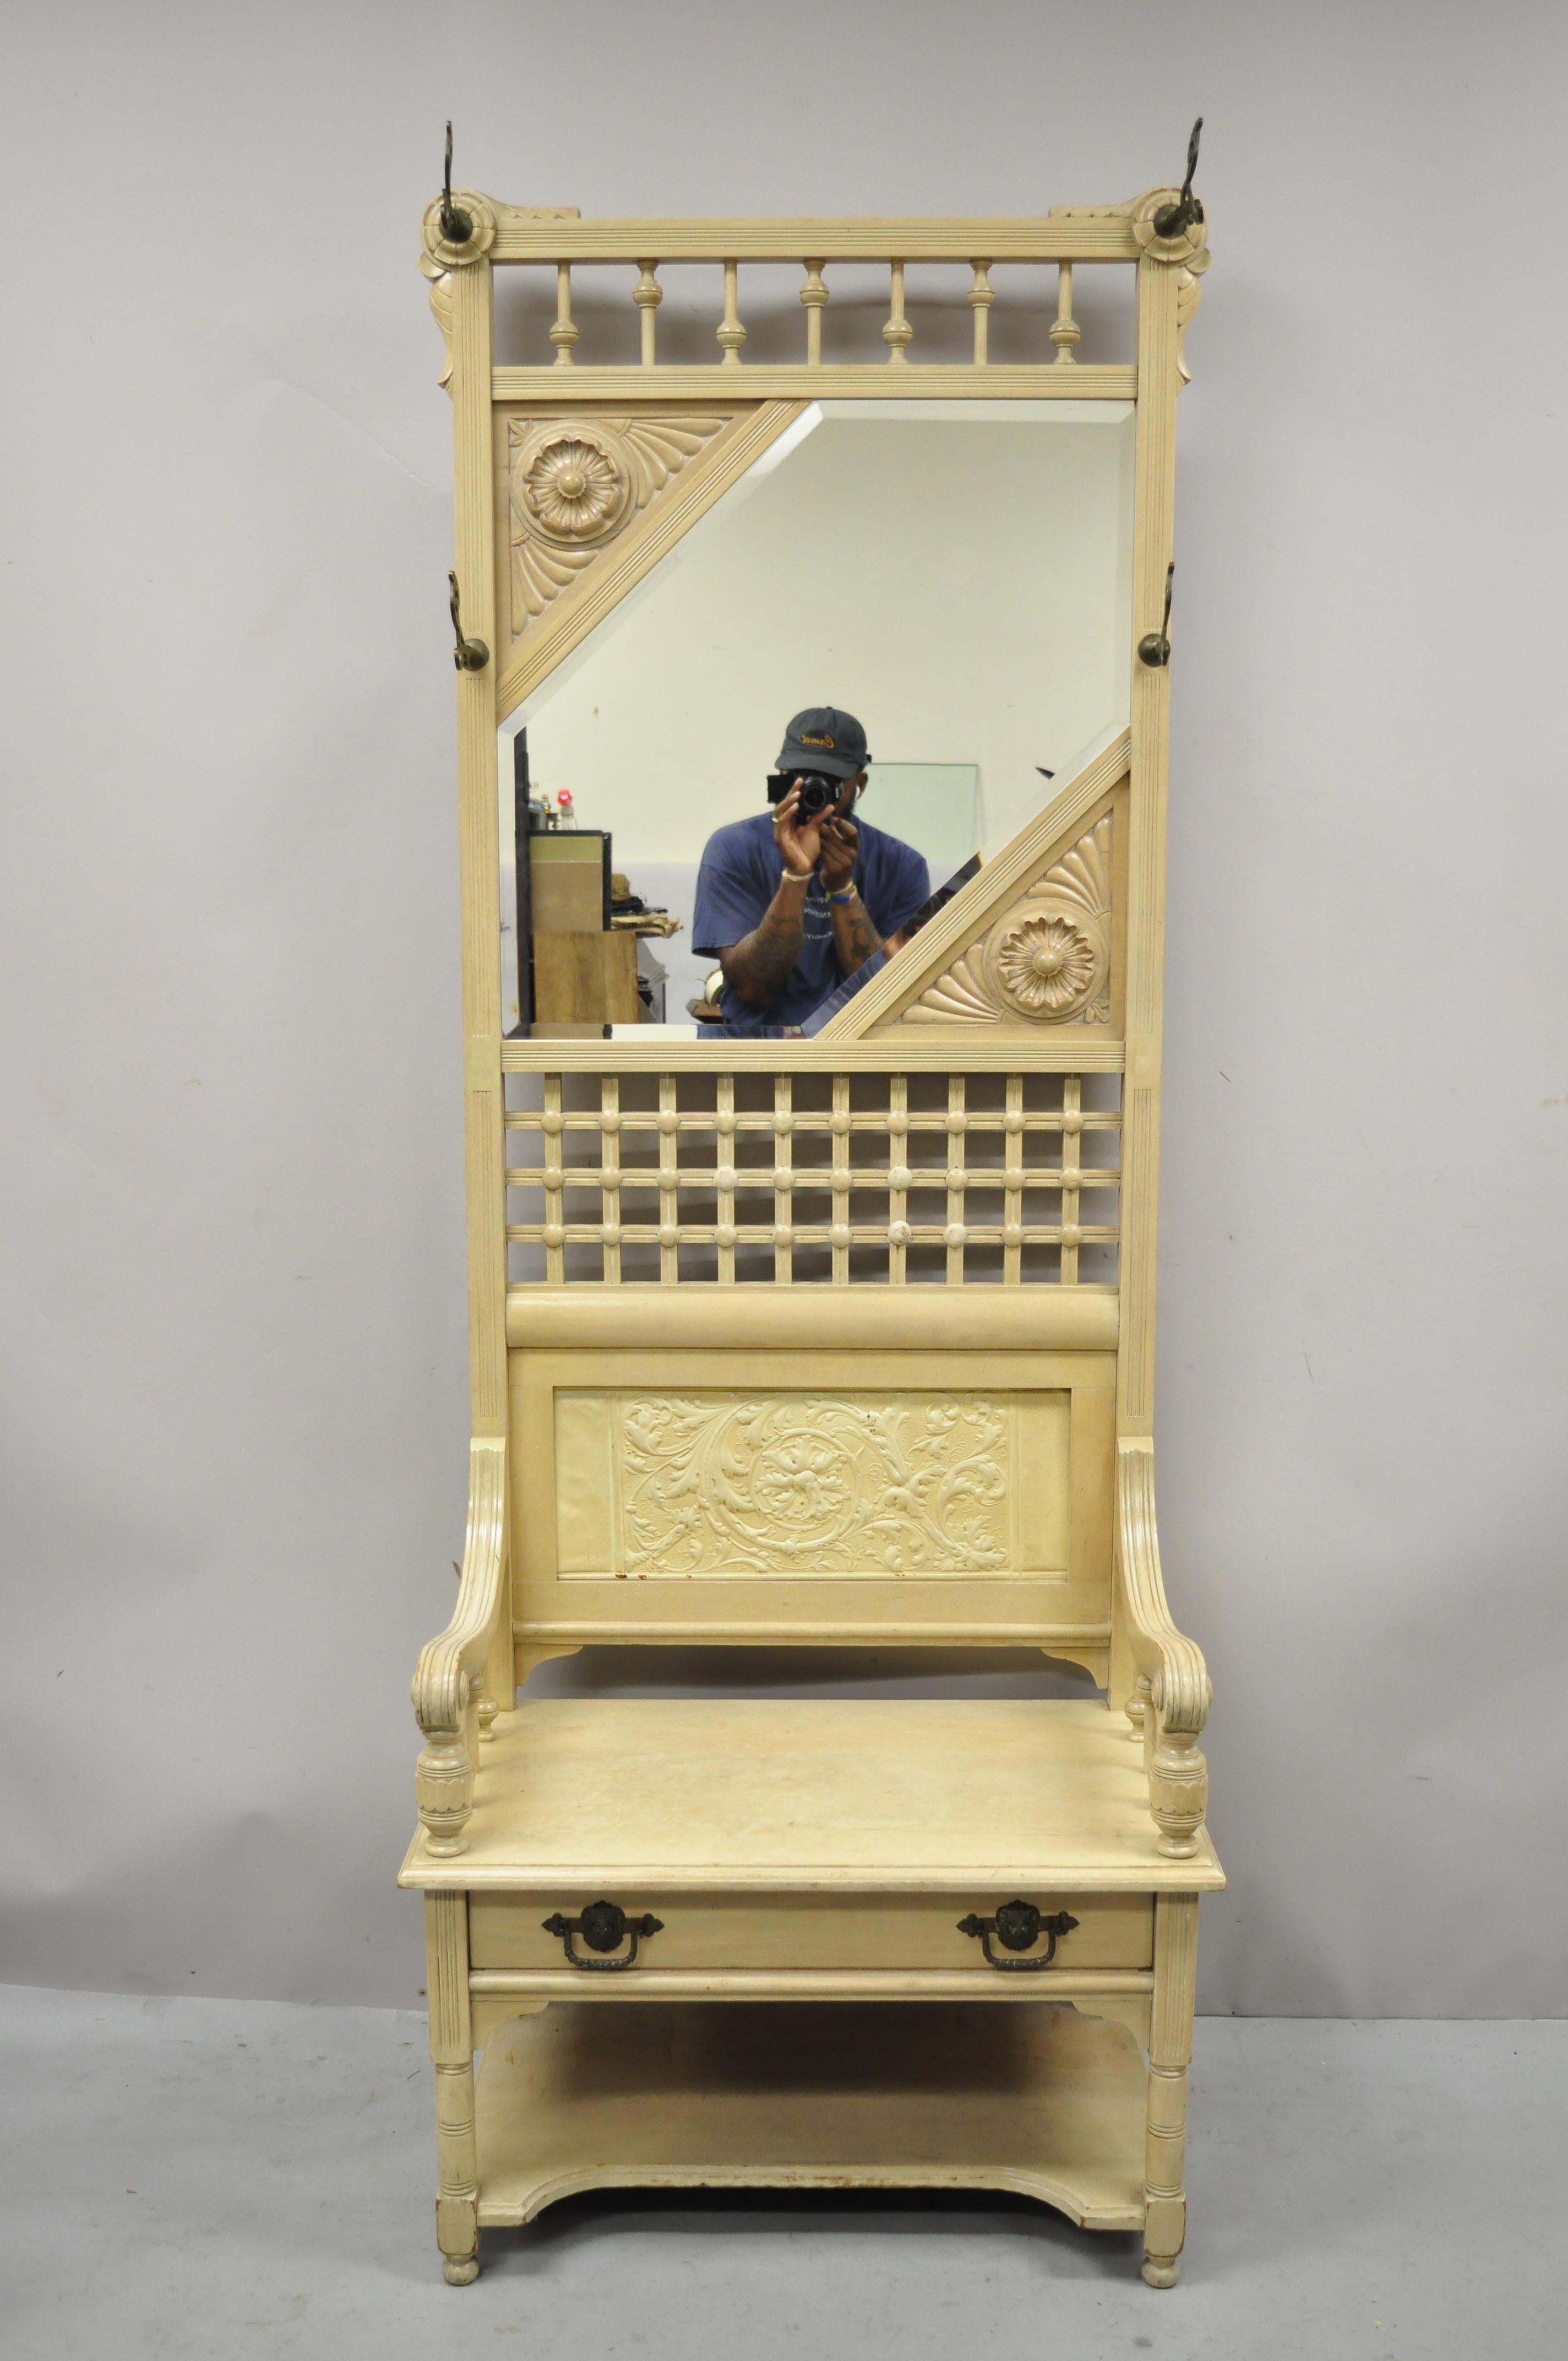 Antique Victorian beveled mirror entry hall coat tree with bench seat and drawer. Item features beveled glass mirror, stick and ball spindle carvings, 4 brass coat hooks, leafy scrollwork carved back panel, seat with arms and lower drawer, solid